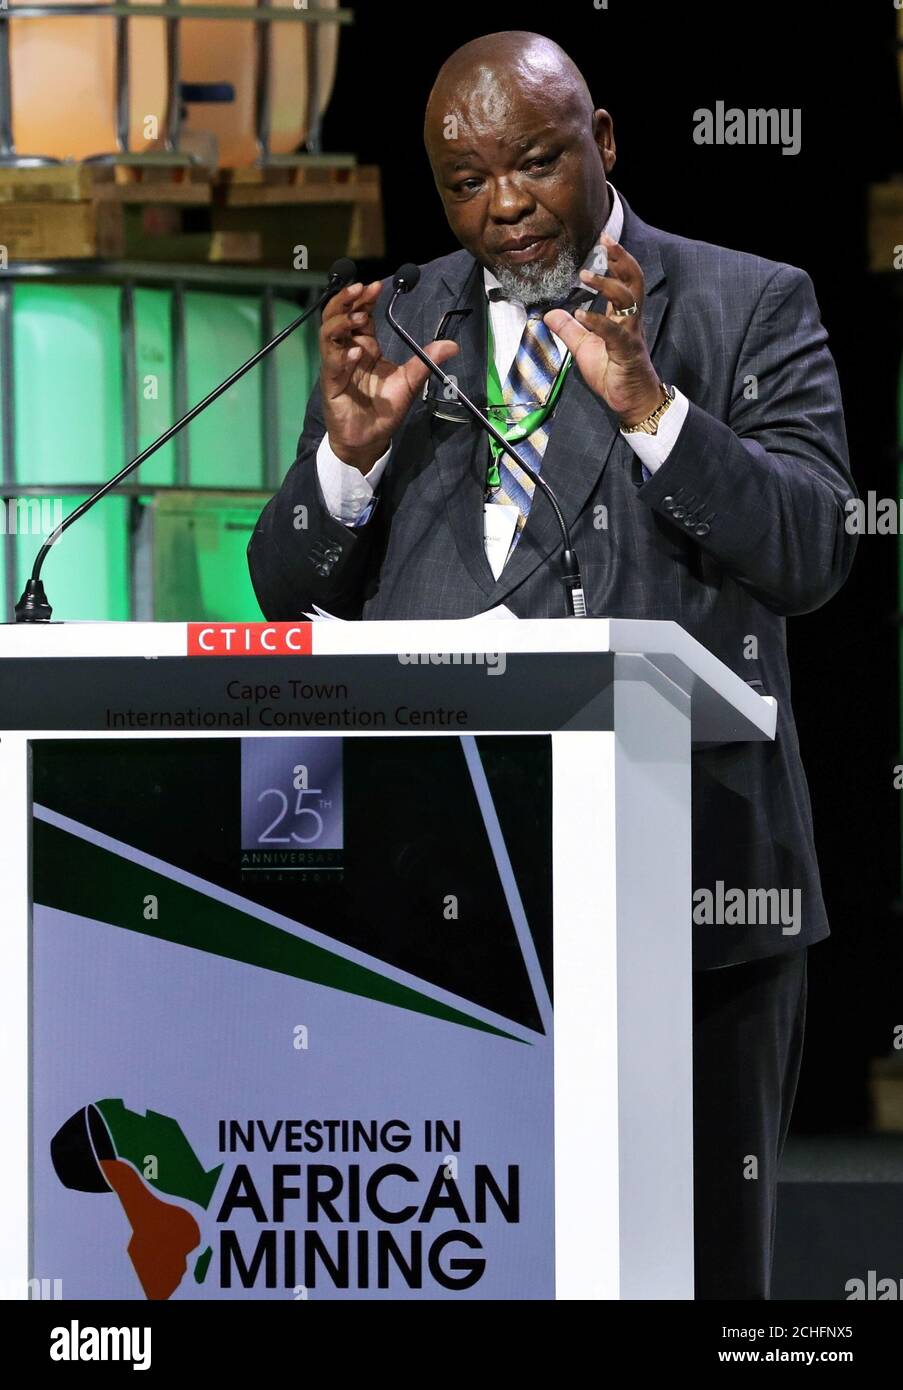 South Africa's Minister of Mineral Resources Gwede Mantashe opens the Investing in African Mining Indaba conference in Cape Town, South Africa February 4, 2019.  REUTERS/Mike Hutchings Stock Photo